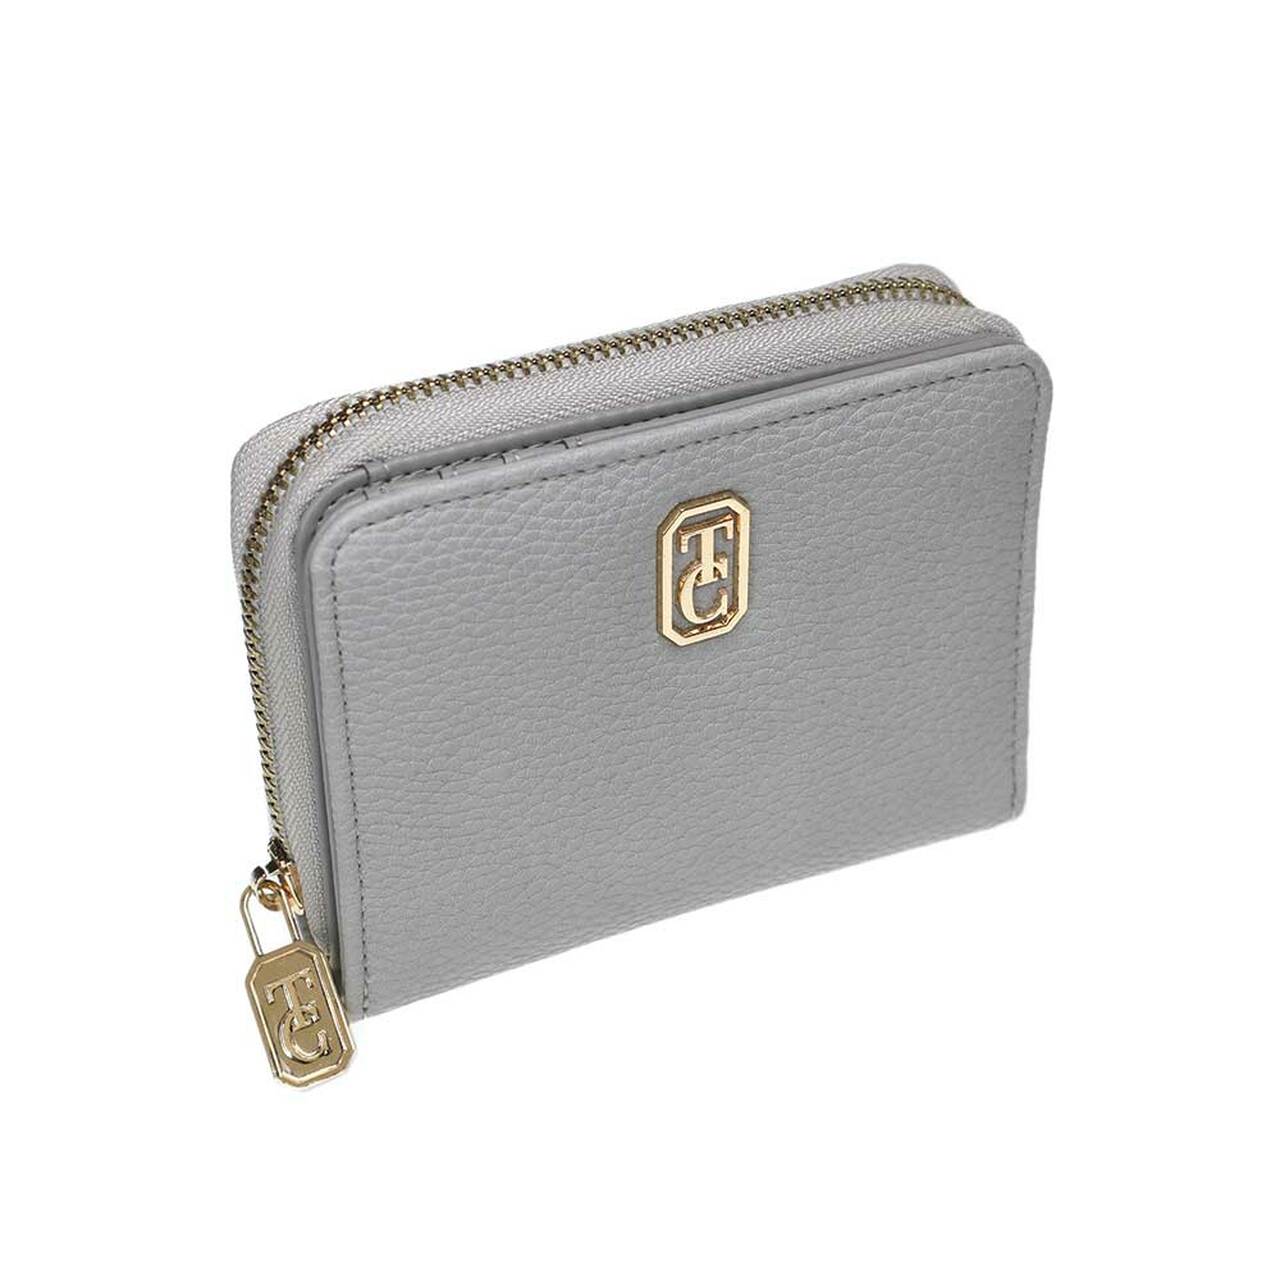 Tipperary Crystal The Windsor Purse - Grey Small  Perfectly sized this versatile wallet will compliment any handbag. Packed into a compact shape, designed to make your life easier!